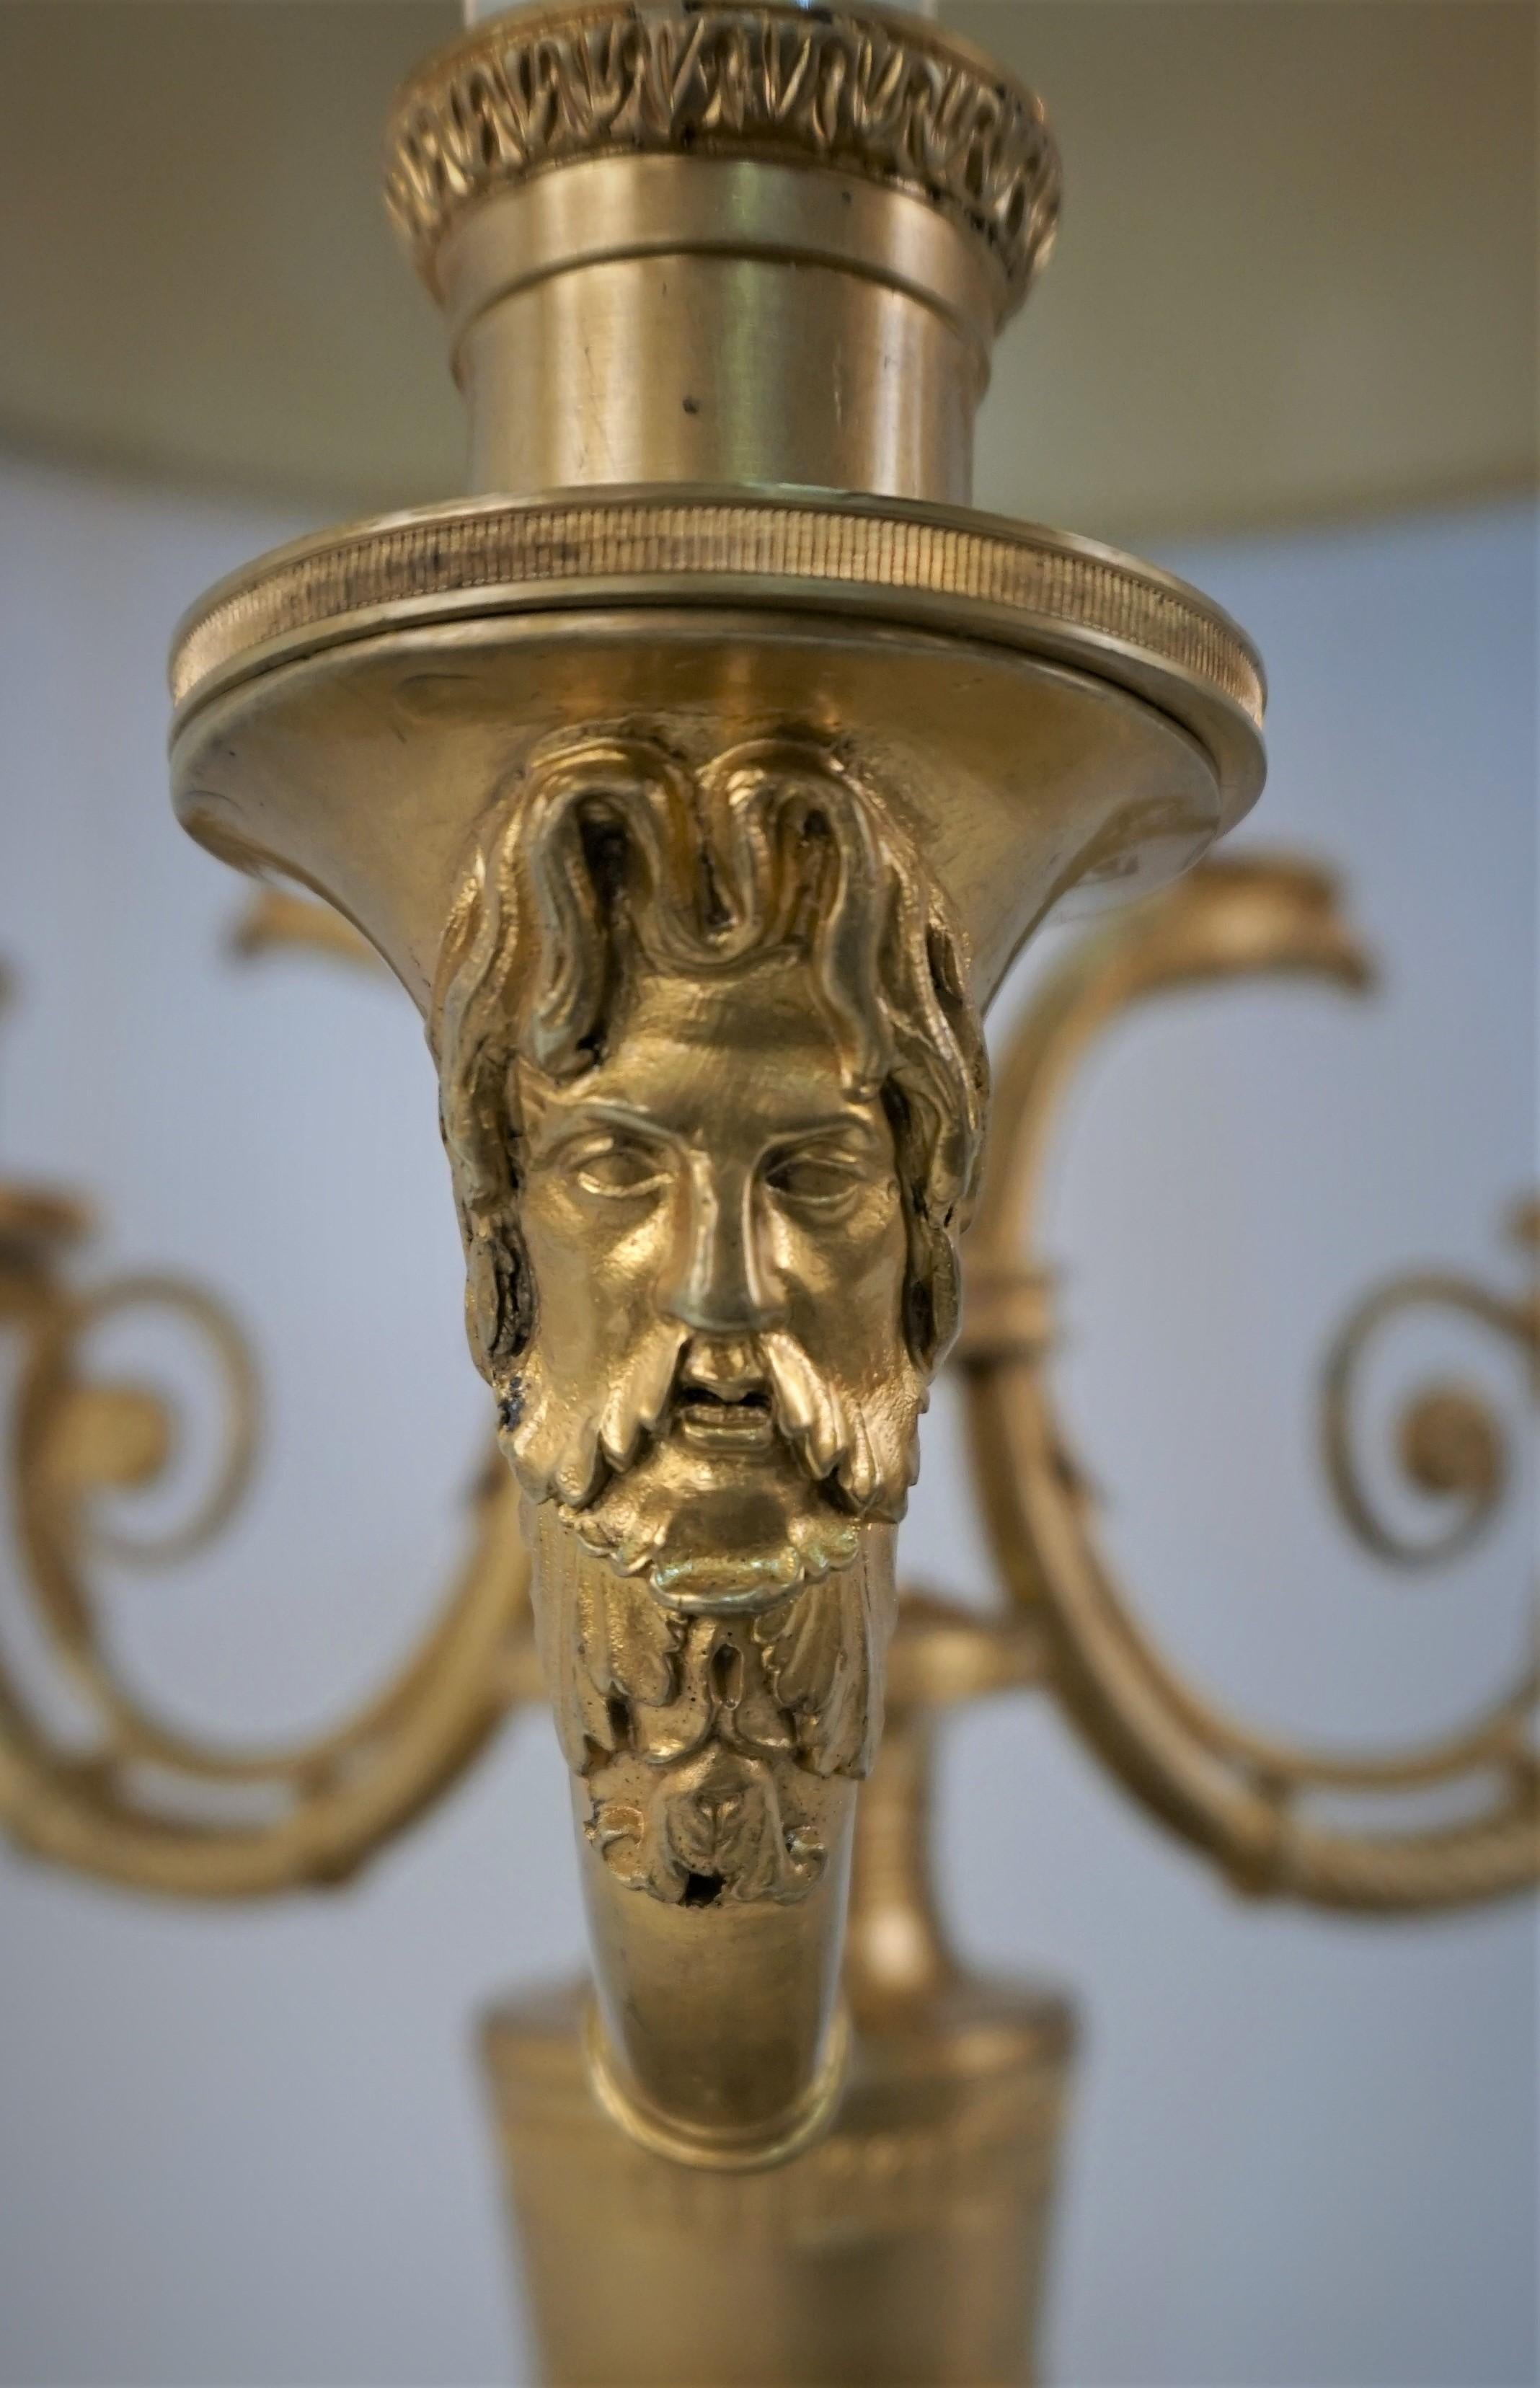 Empire gilt bronze three-light Bouillotte lamp, crafted in France in great detail casting.